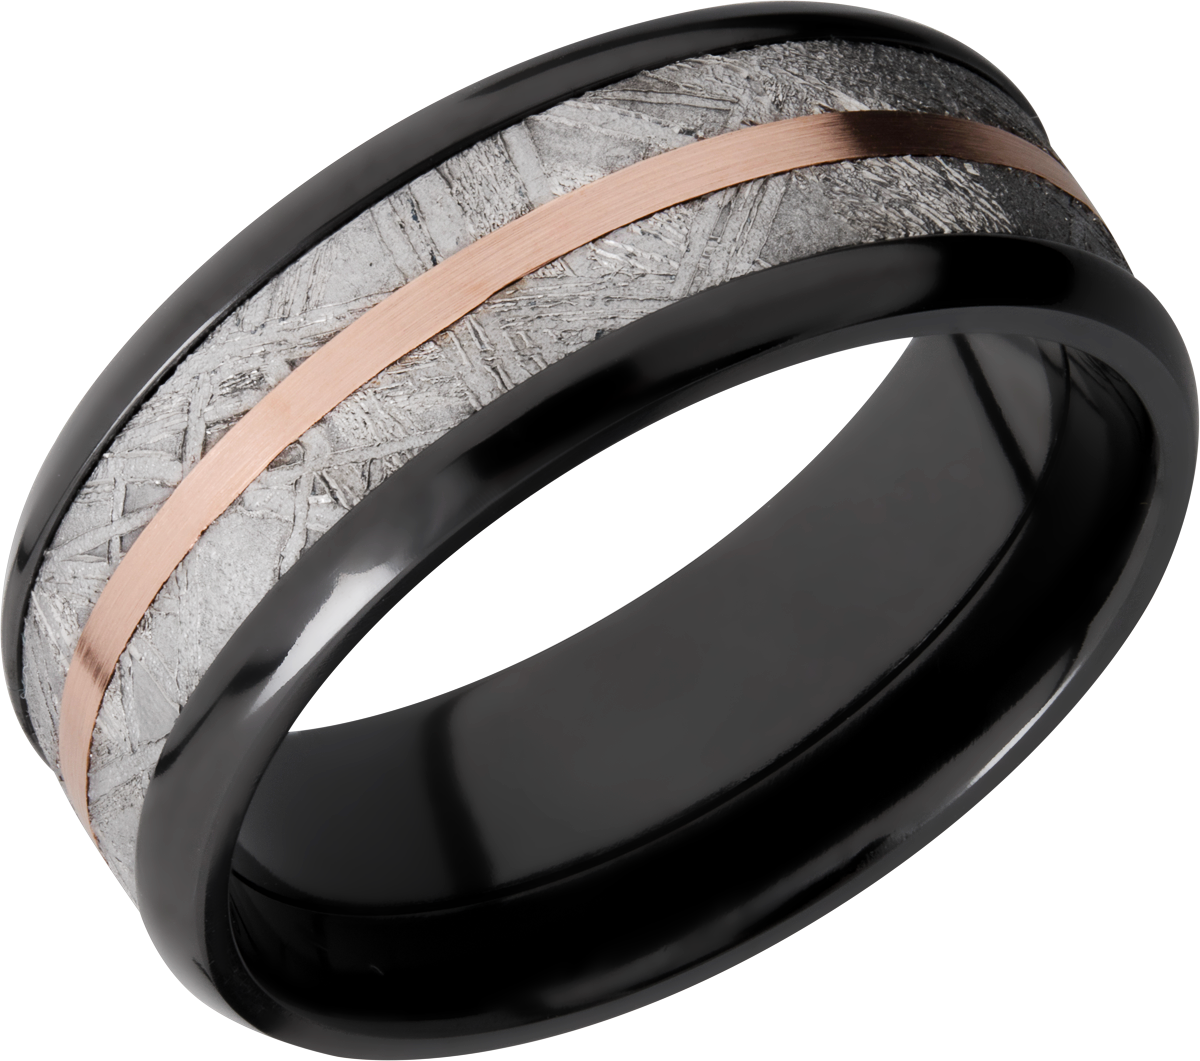 Black zirconium 8mm beveled edge band with one inlay that is 5mm wide of a mosaic material. (NS) =